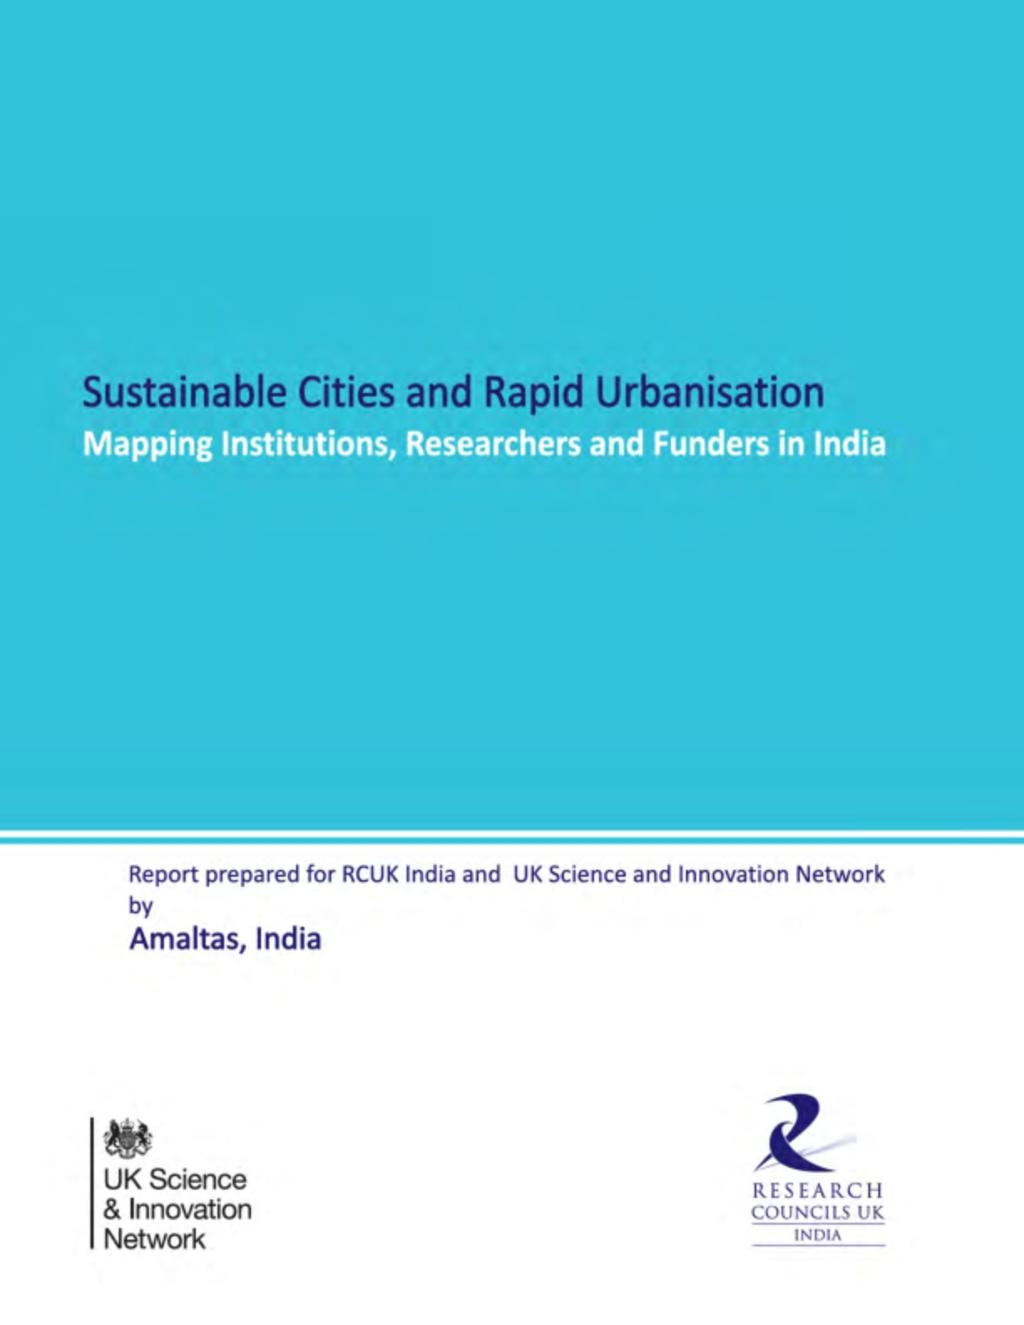 Sustainable Cities and Rapid Urbanisation Mapping Institutions, Researchers and Funders in India